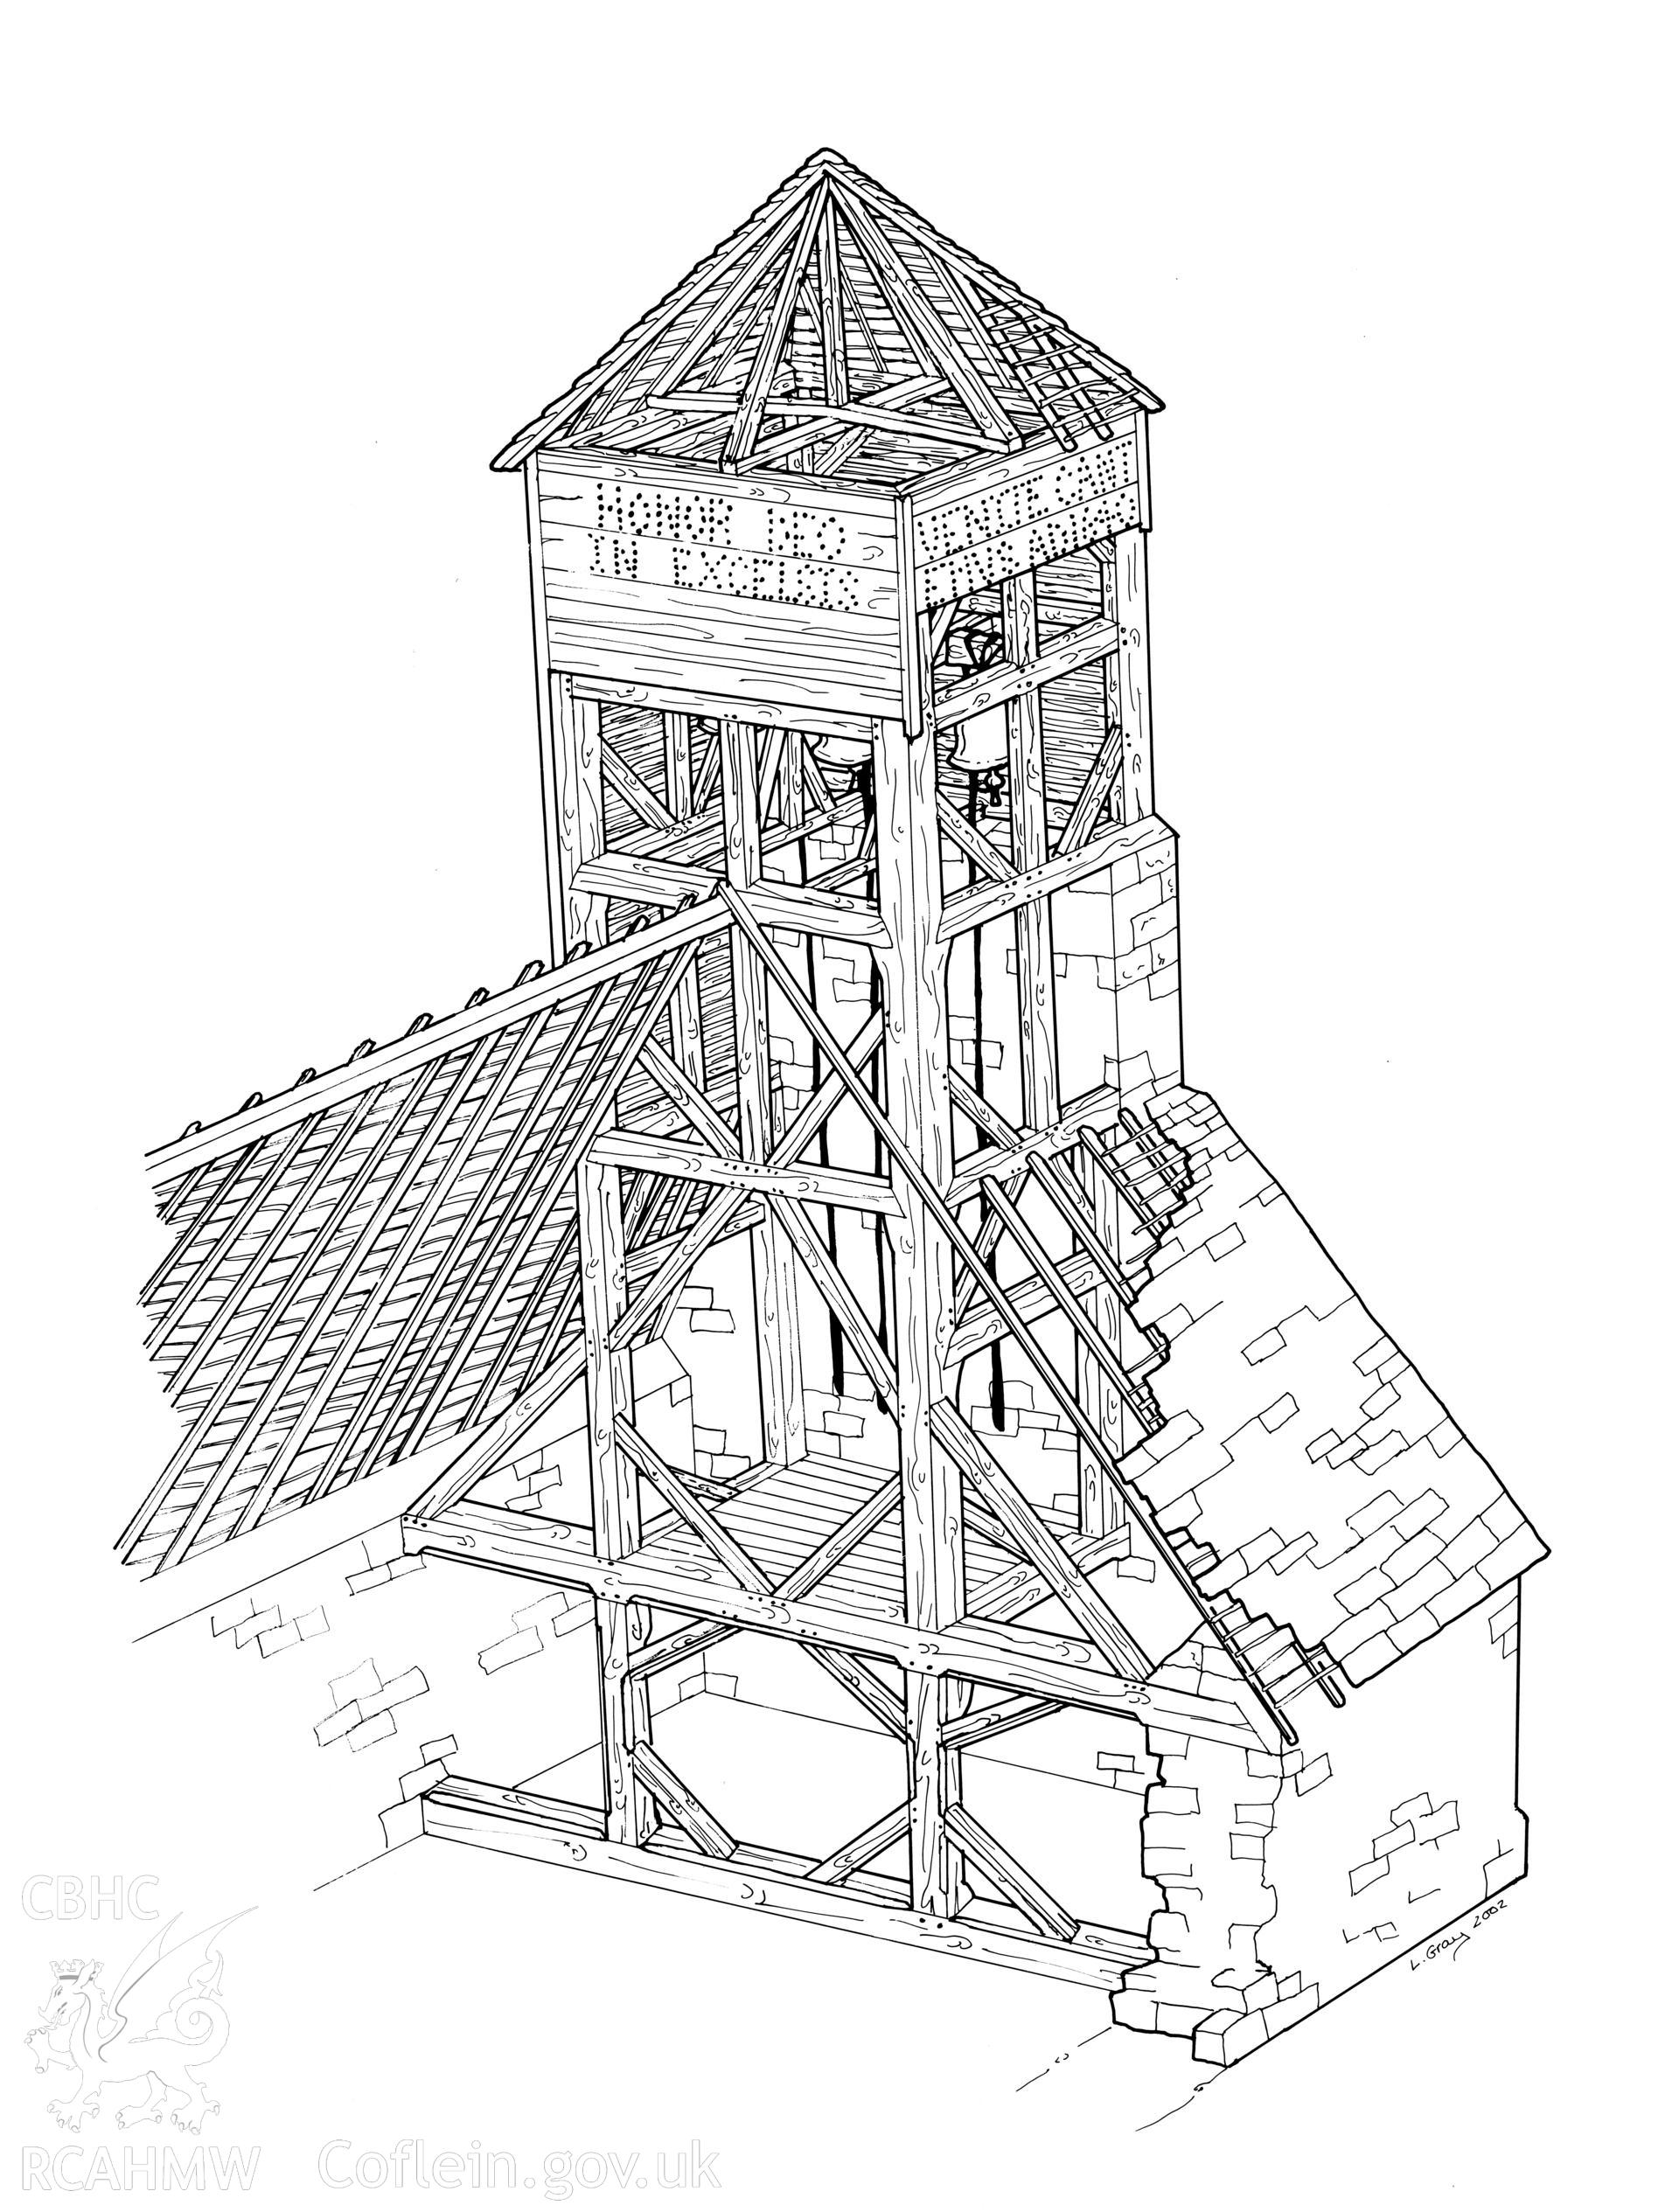 Cutaway drawing showing the tower at Mallwyd Church, produced by Lorna Gray for Richard Suggett, and published in  'Dr John Davies of Mallwyd: Welsh Renaissance Scholar', ed. Ceri Davies  (Cardiff, 2004), ch. 10.